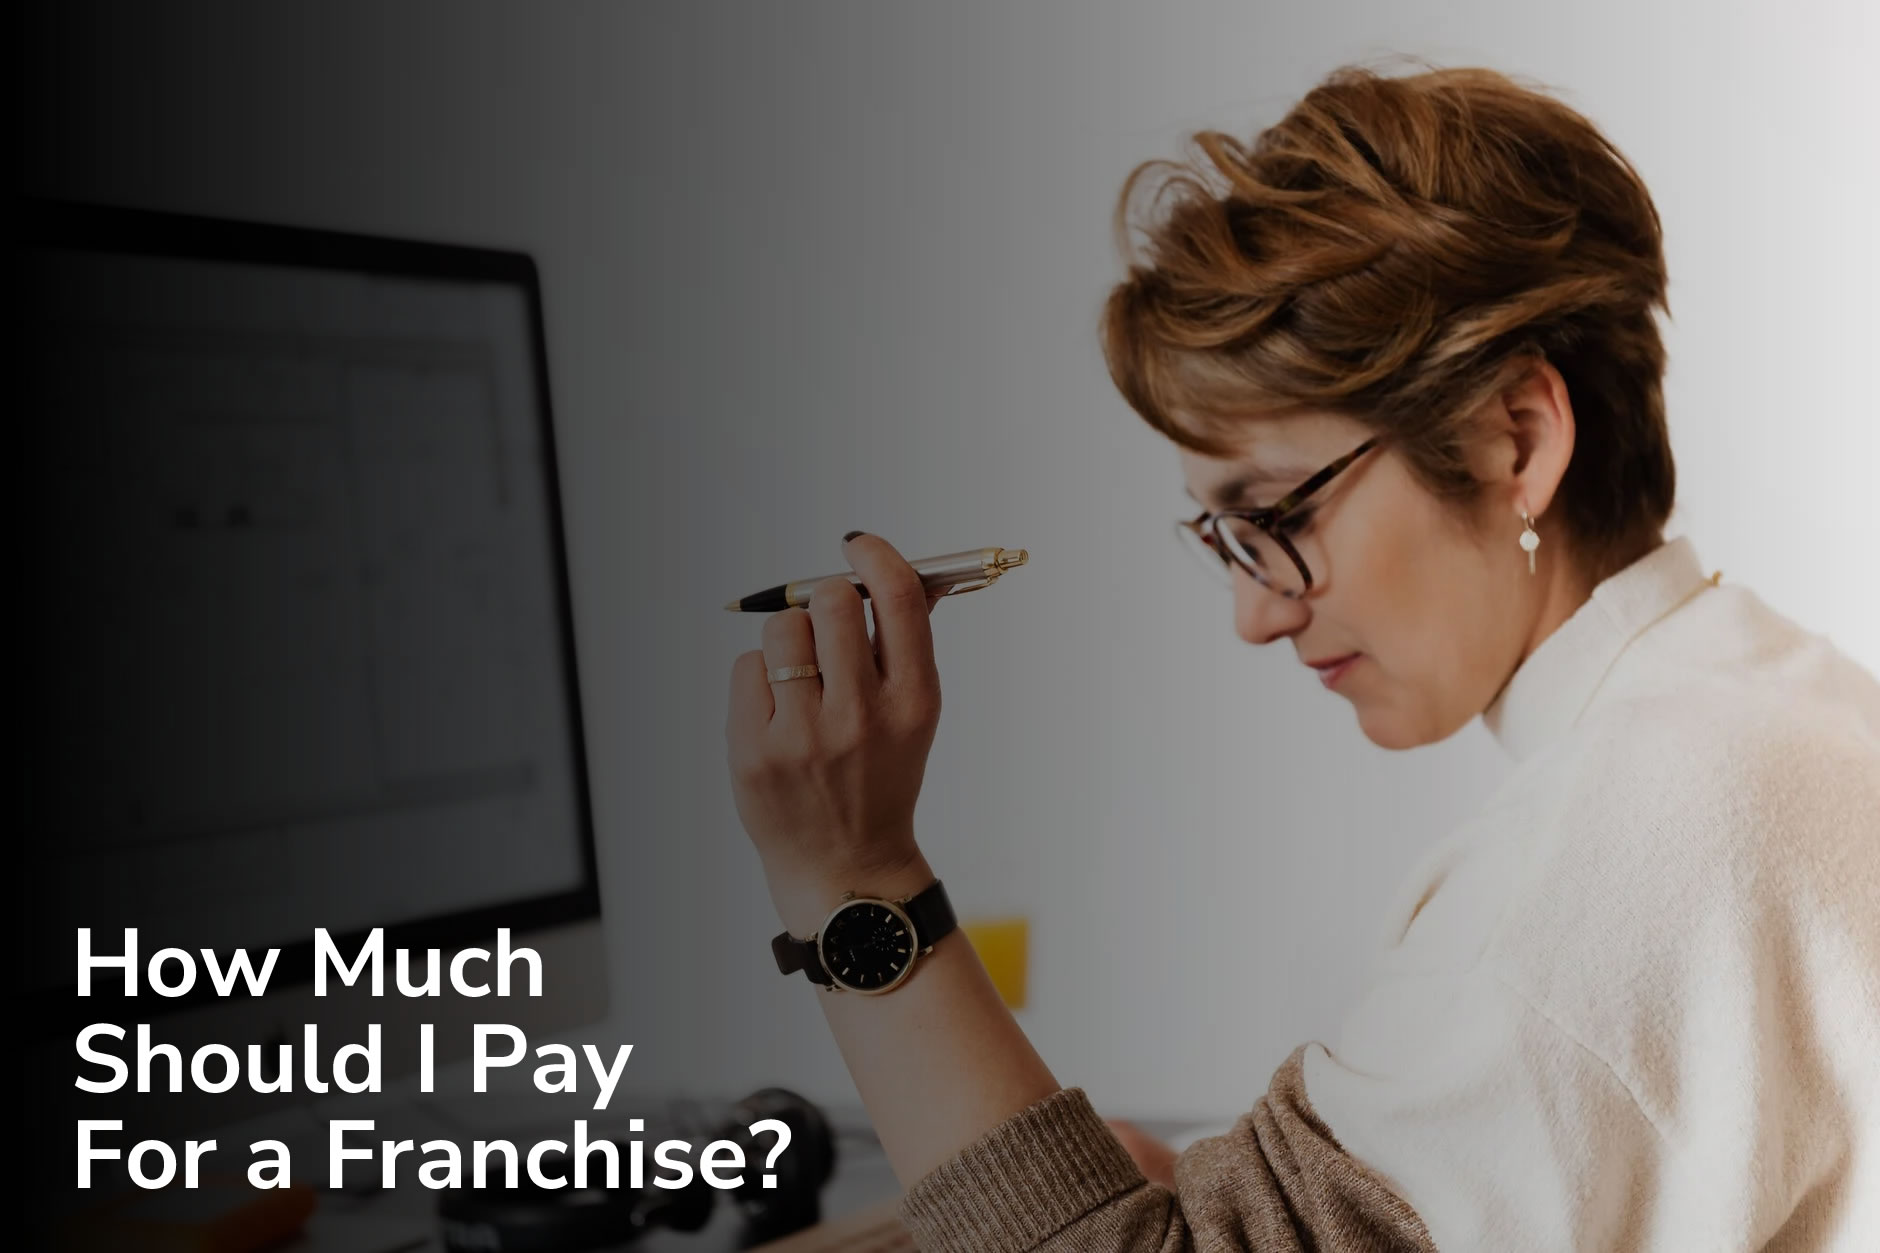 How much should I pay for a franchise